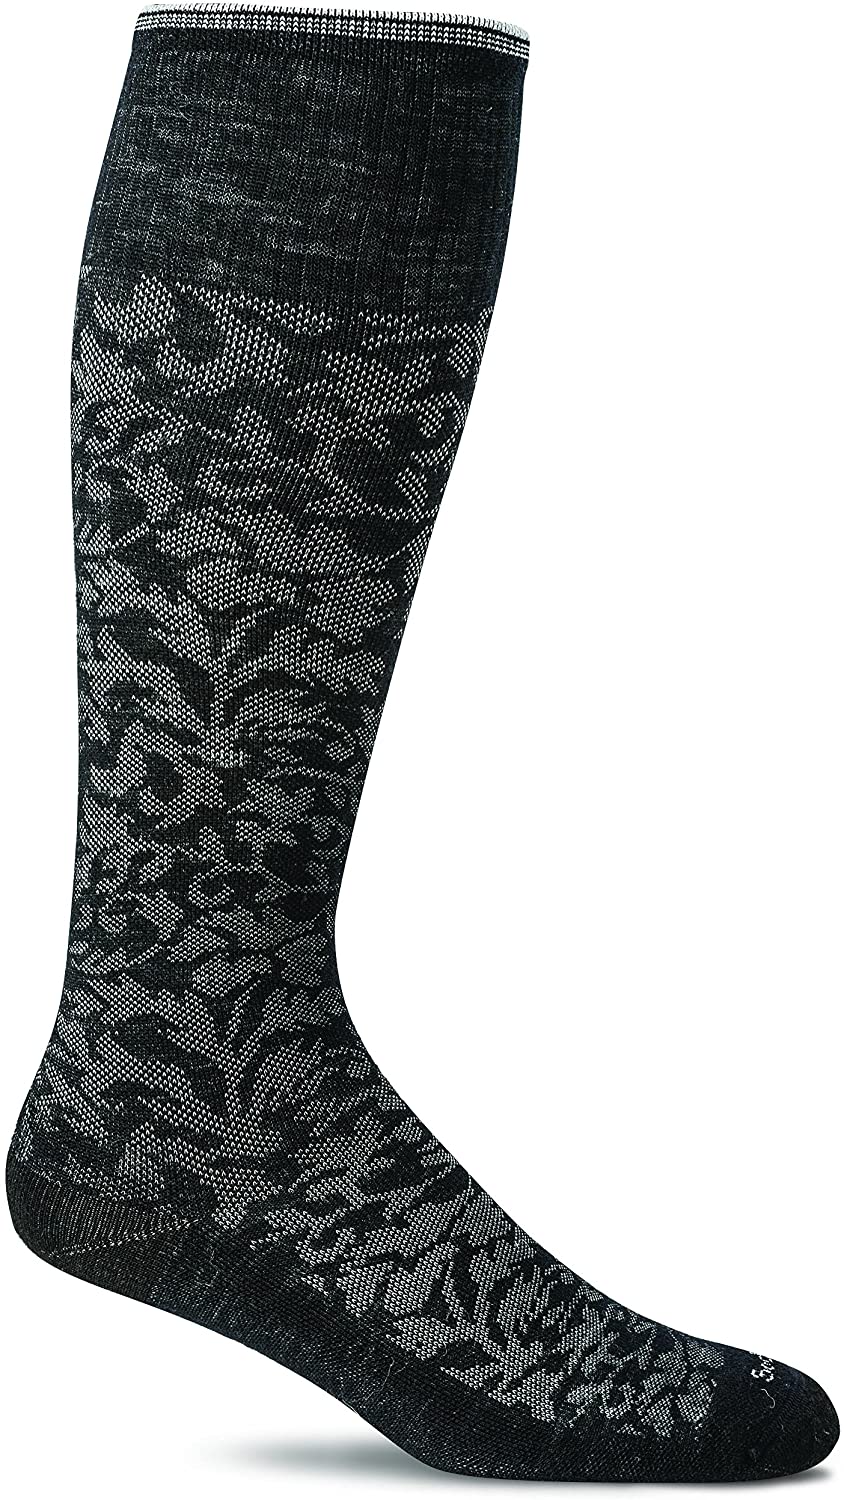 Sockwell Women's Damask Moderate Graduated Compression Sock in Black from the side